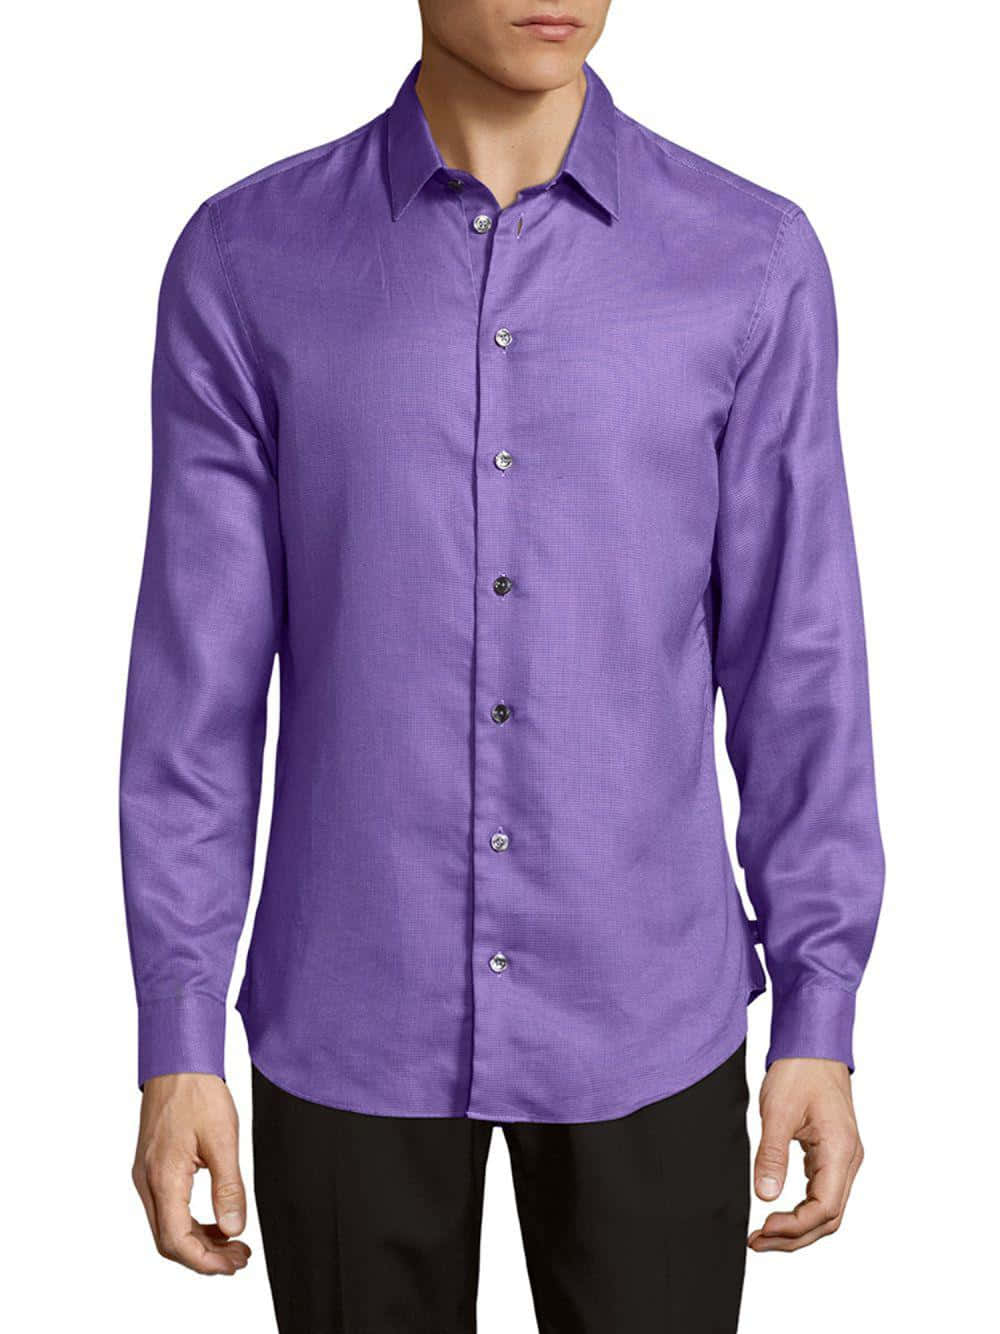 Simple and stylish, this purple shirt brings a refreshing look to any outfit. Wallpaper